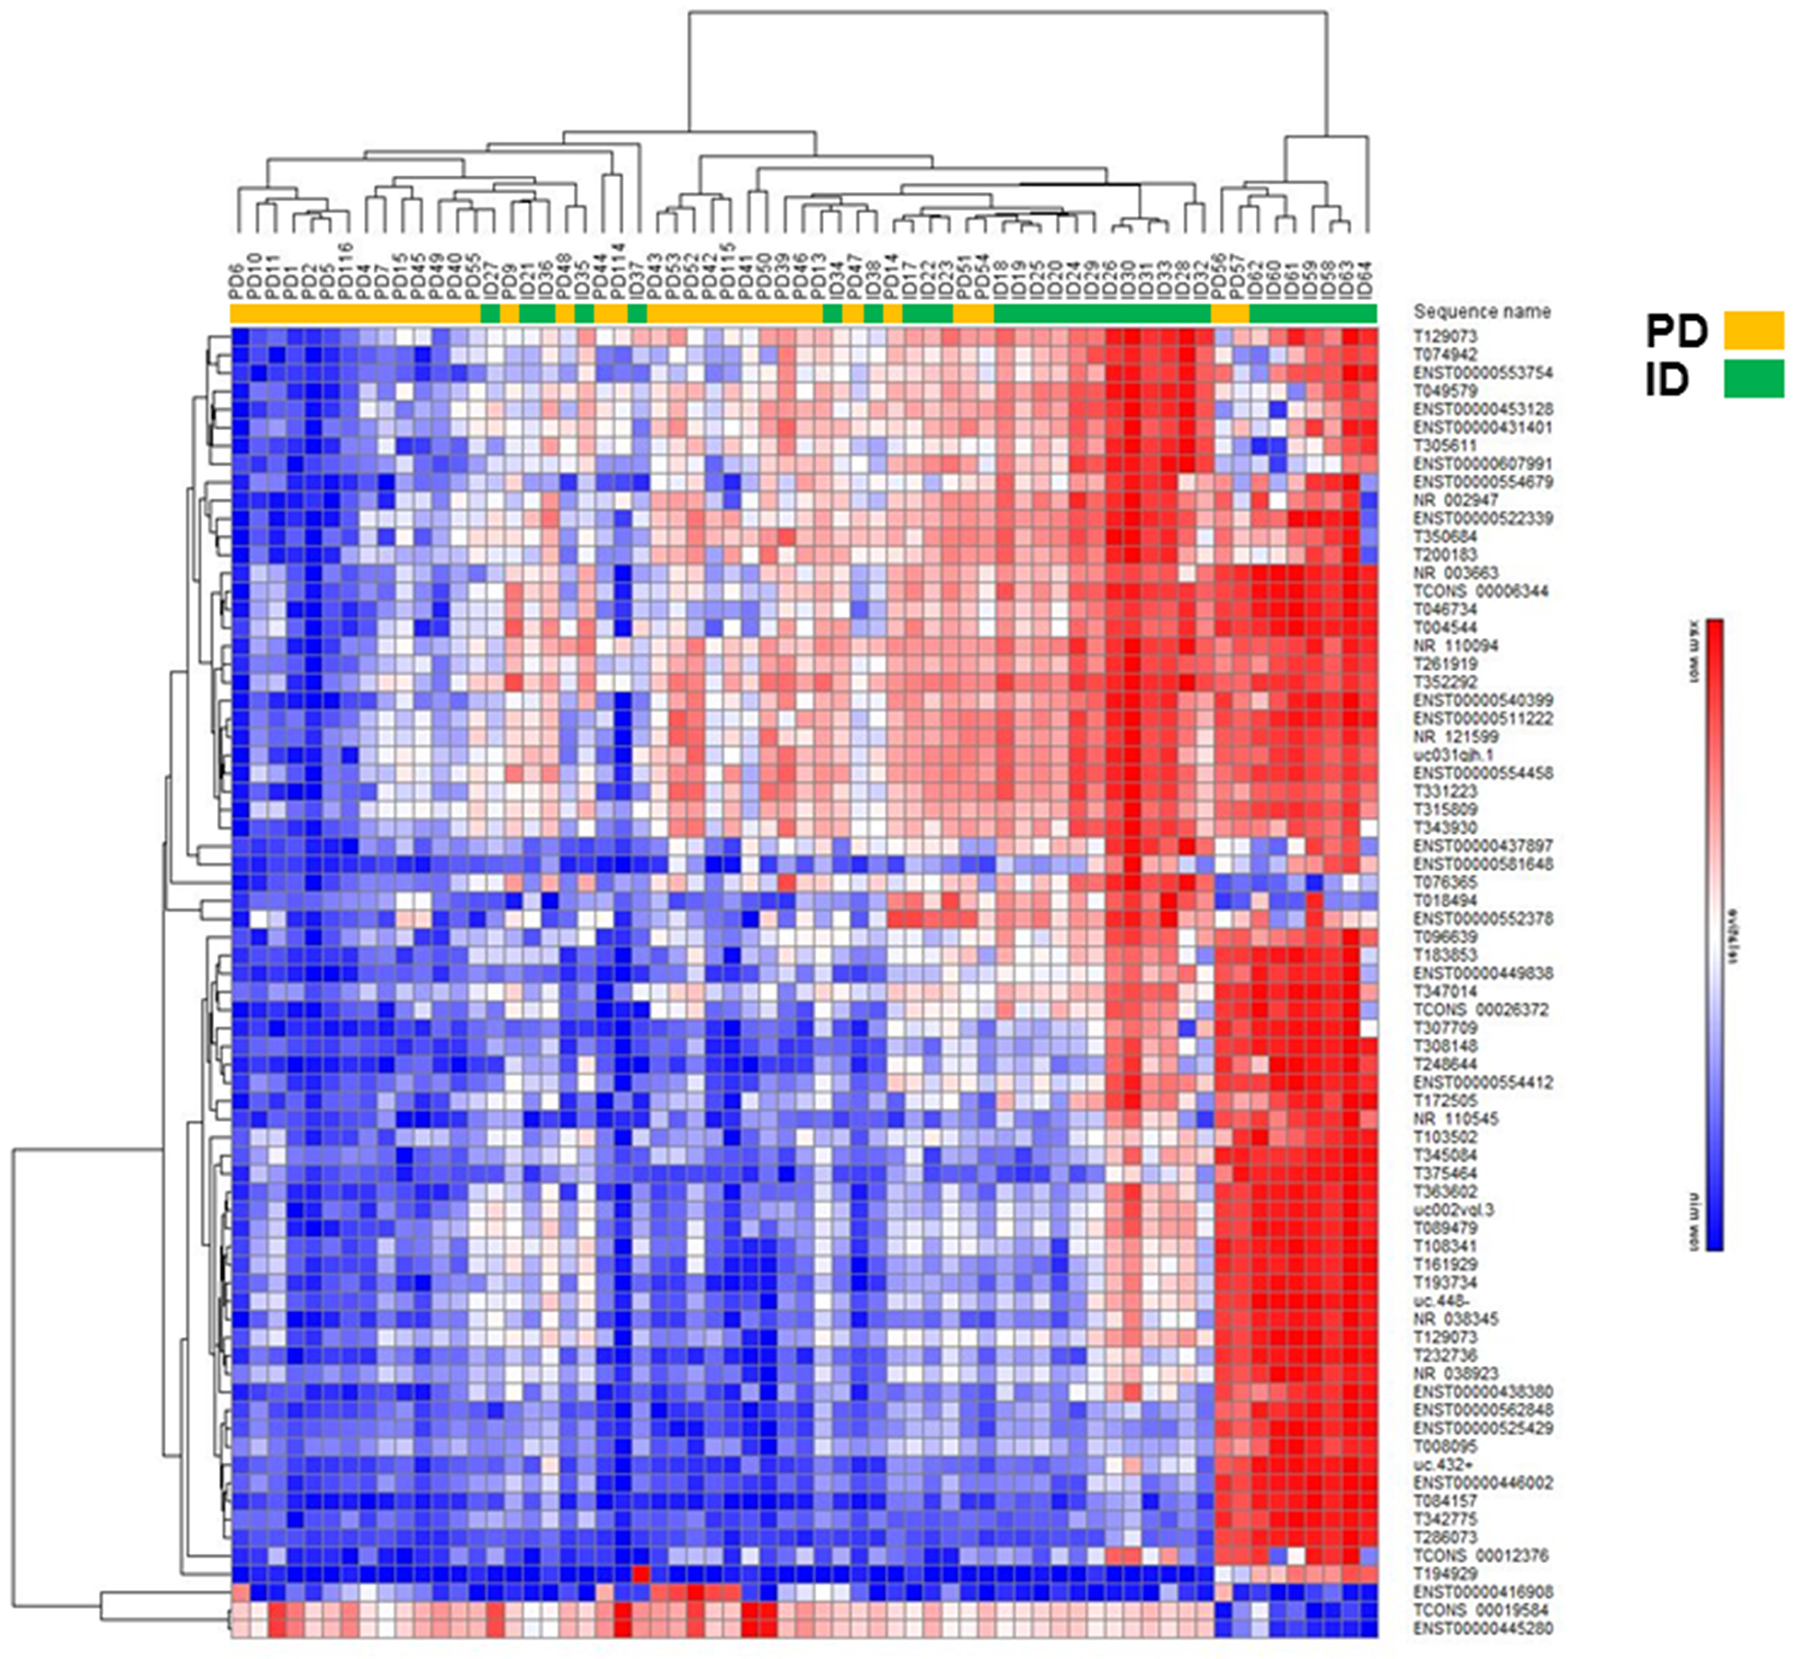 Hierarchical clustering analysis of differentially expressed lncRNAs in PD vs ID early stage CLL.